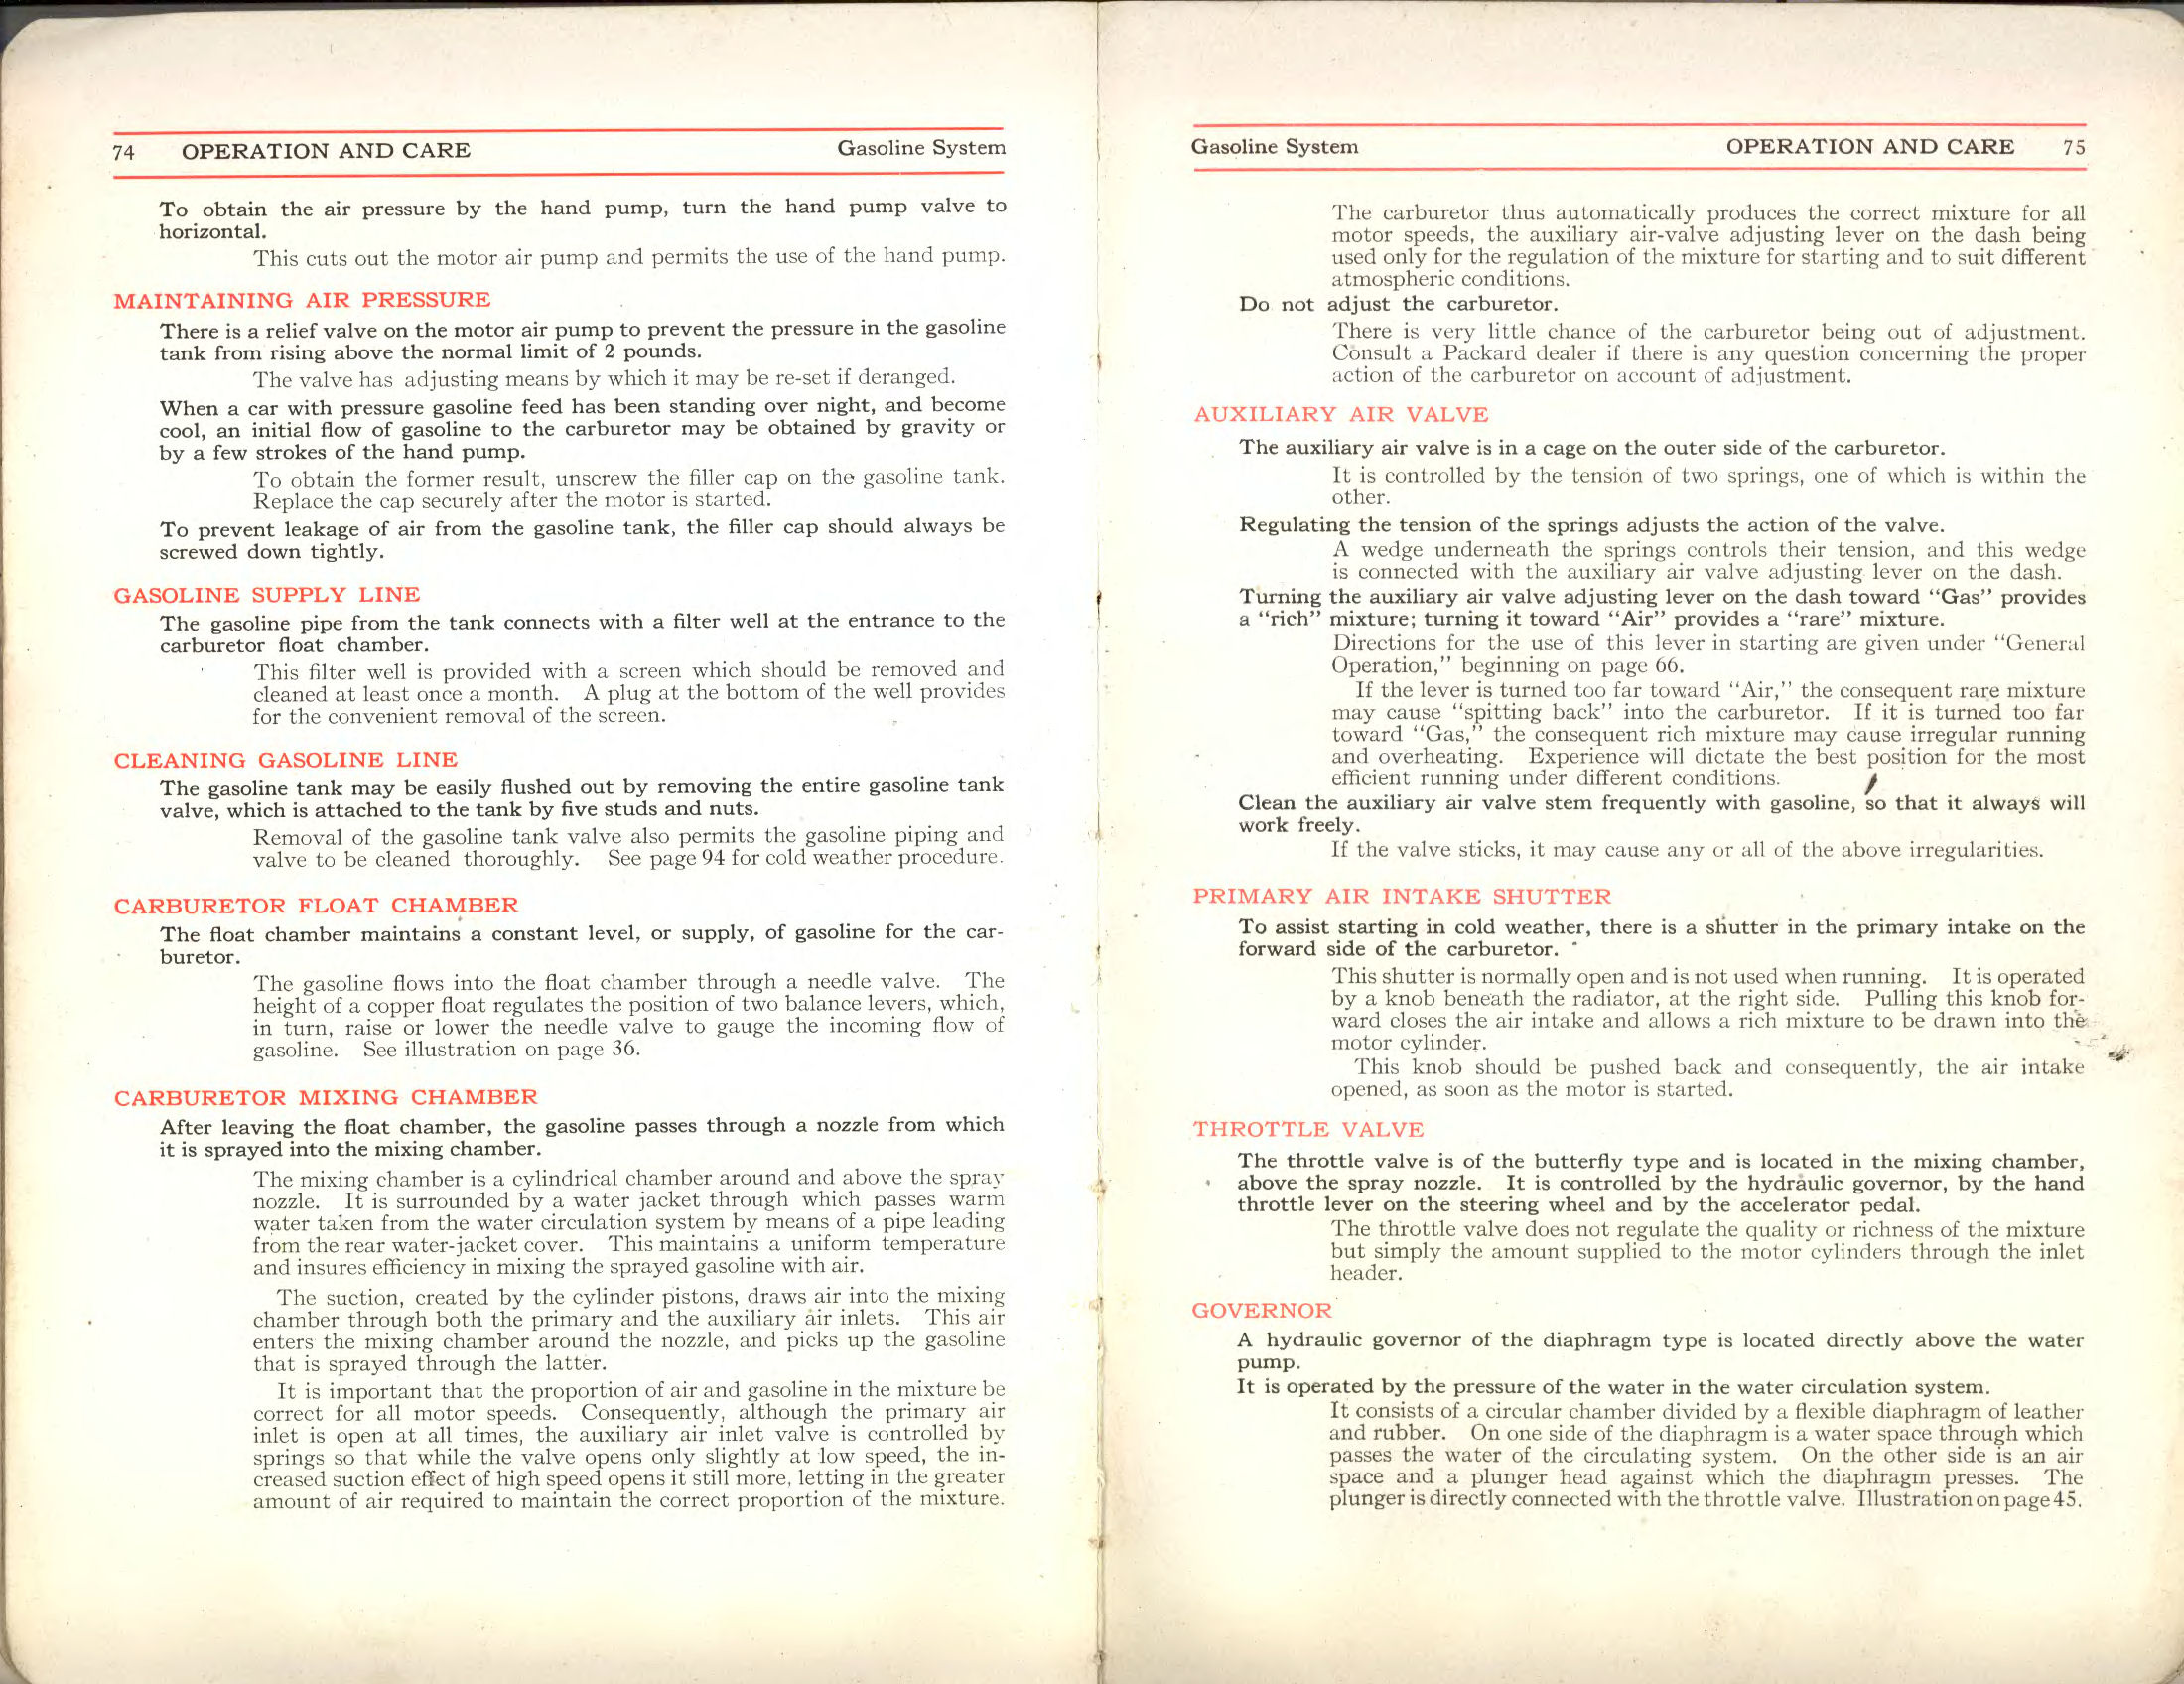 1911 Packard Owners Manual Page 22